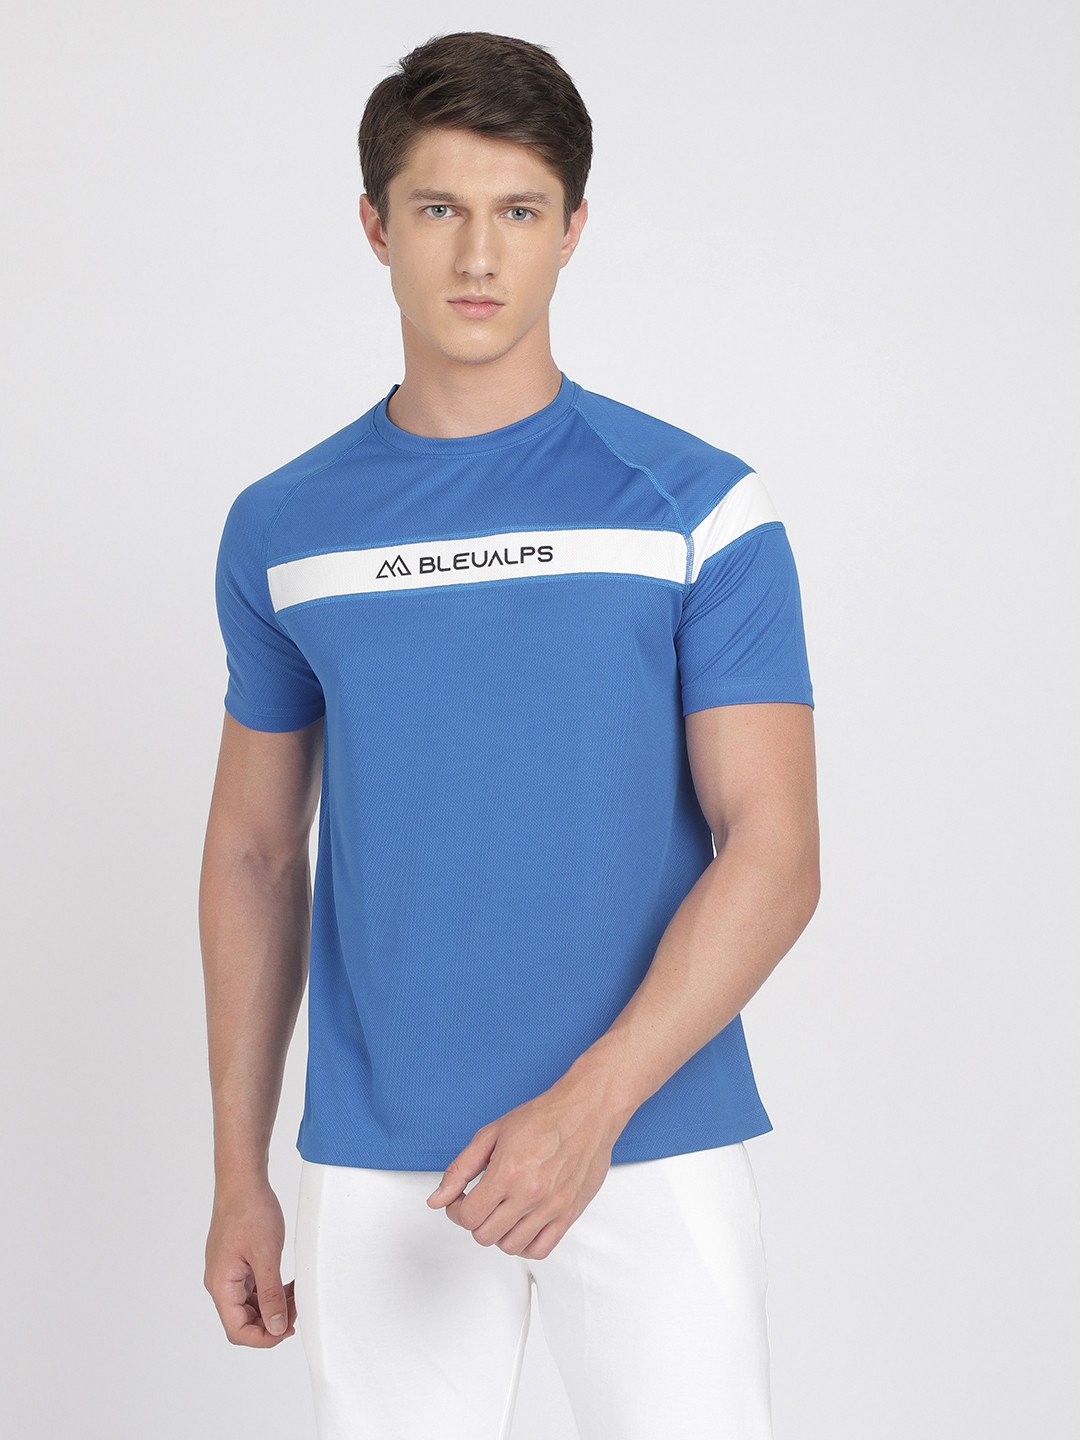 Bleualps Attractive Activewear Sports Round Neck Half Sleeve Polyester T-Shirt For Men | Men's T-Shirts